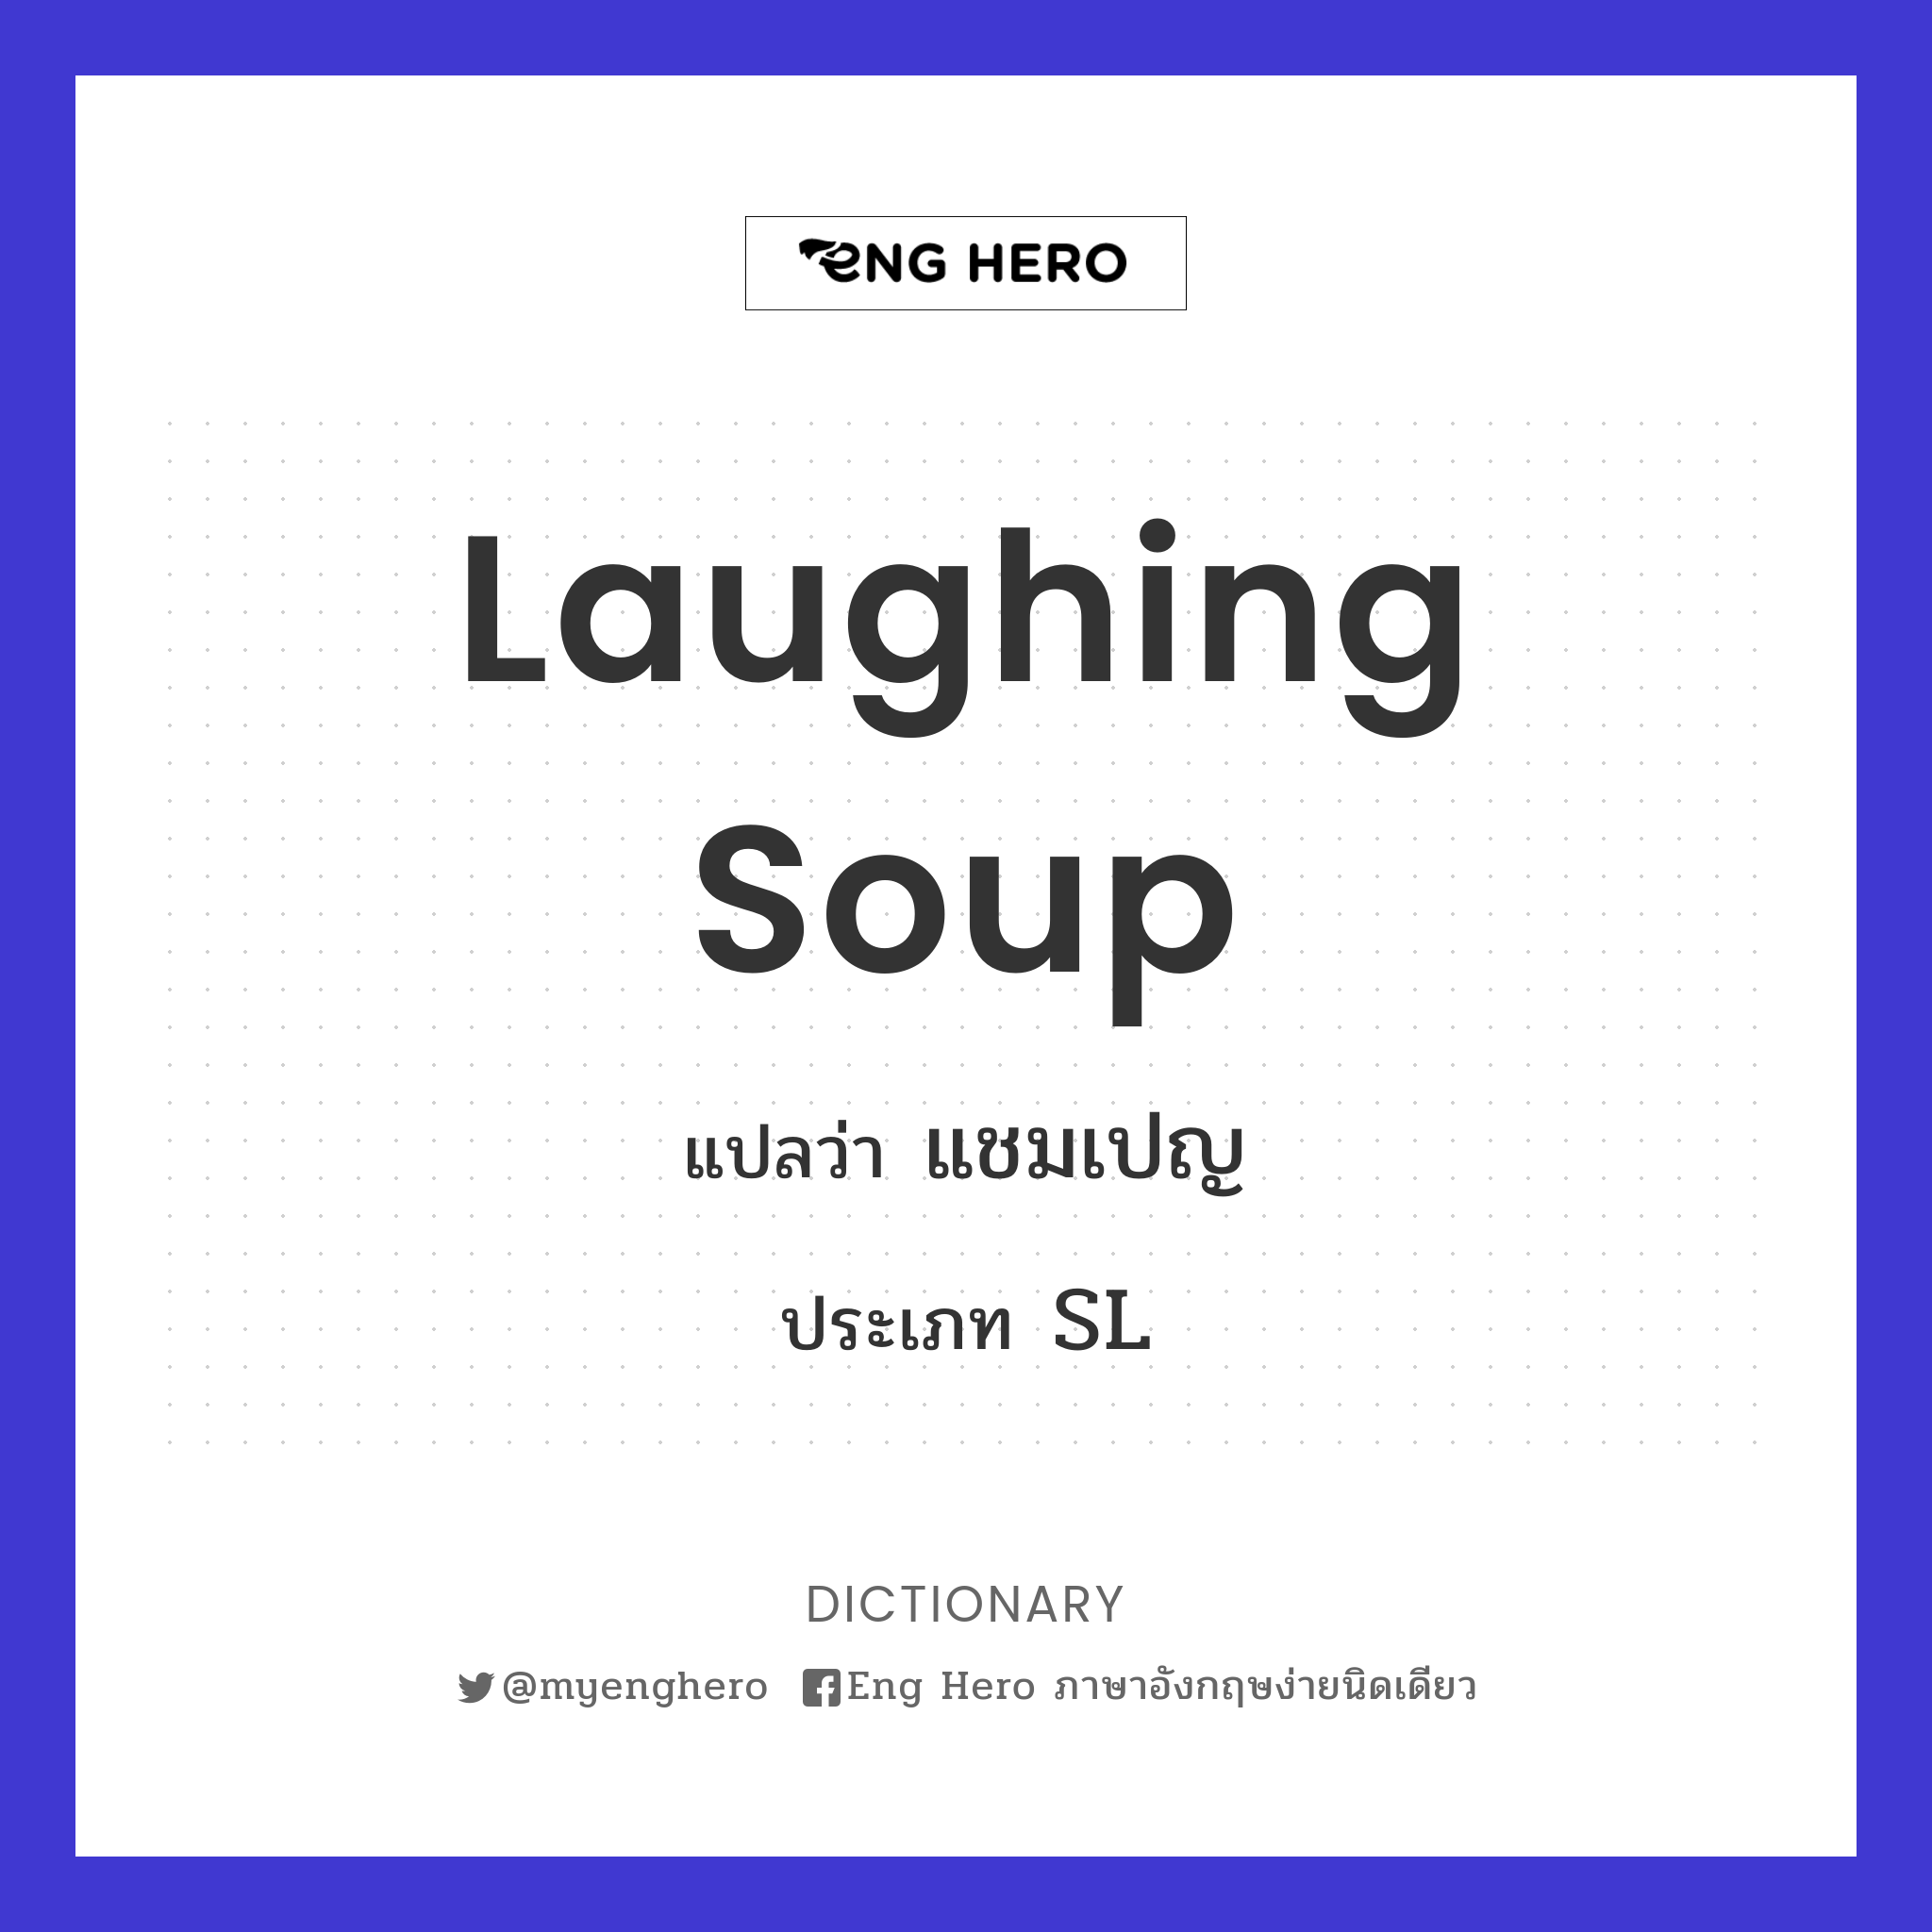 laughing soup